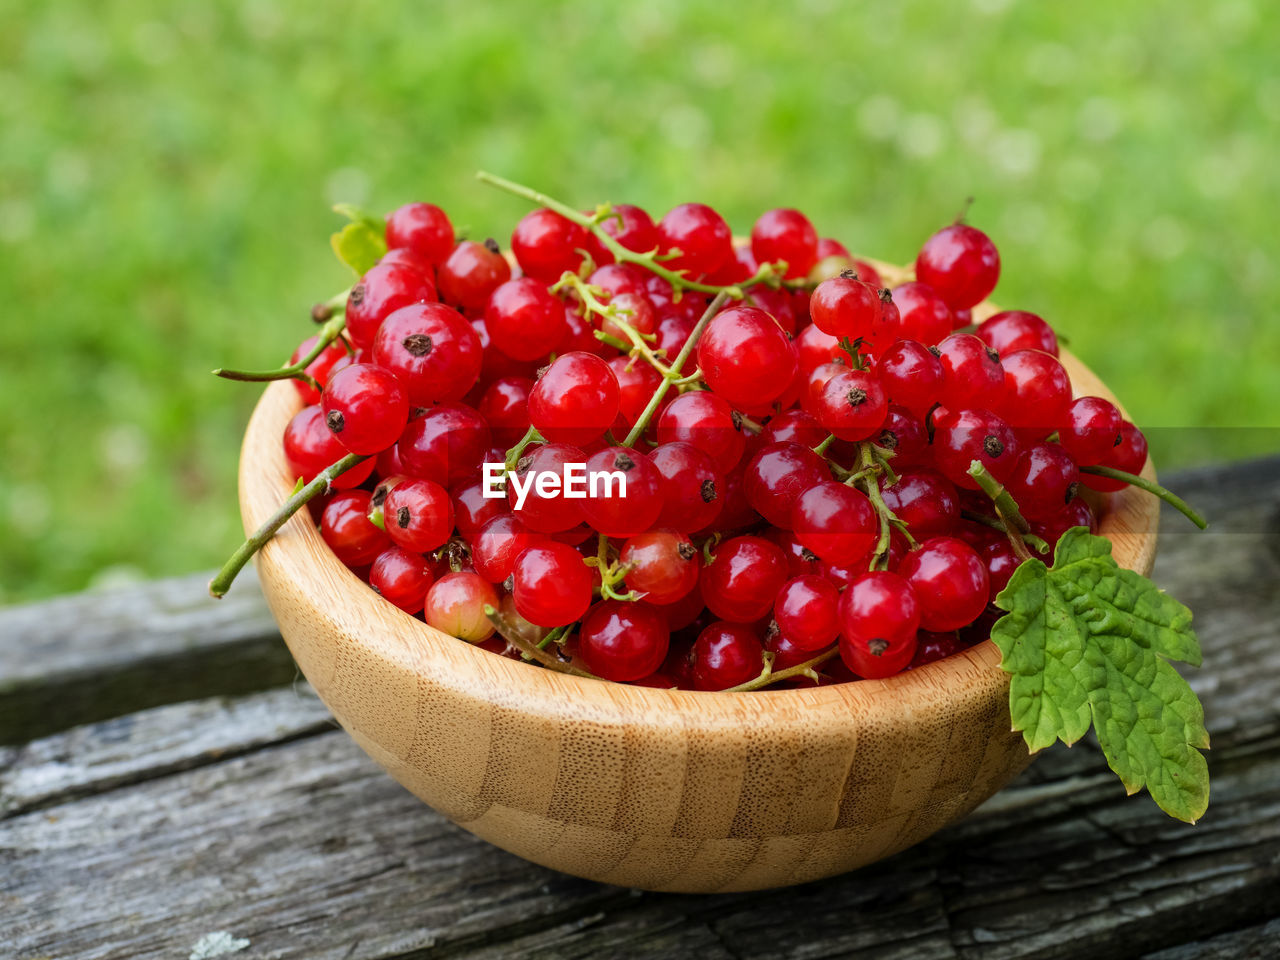 Close-up of red currents in bowl on table